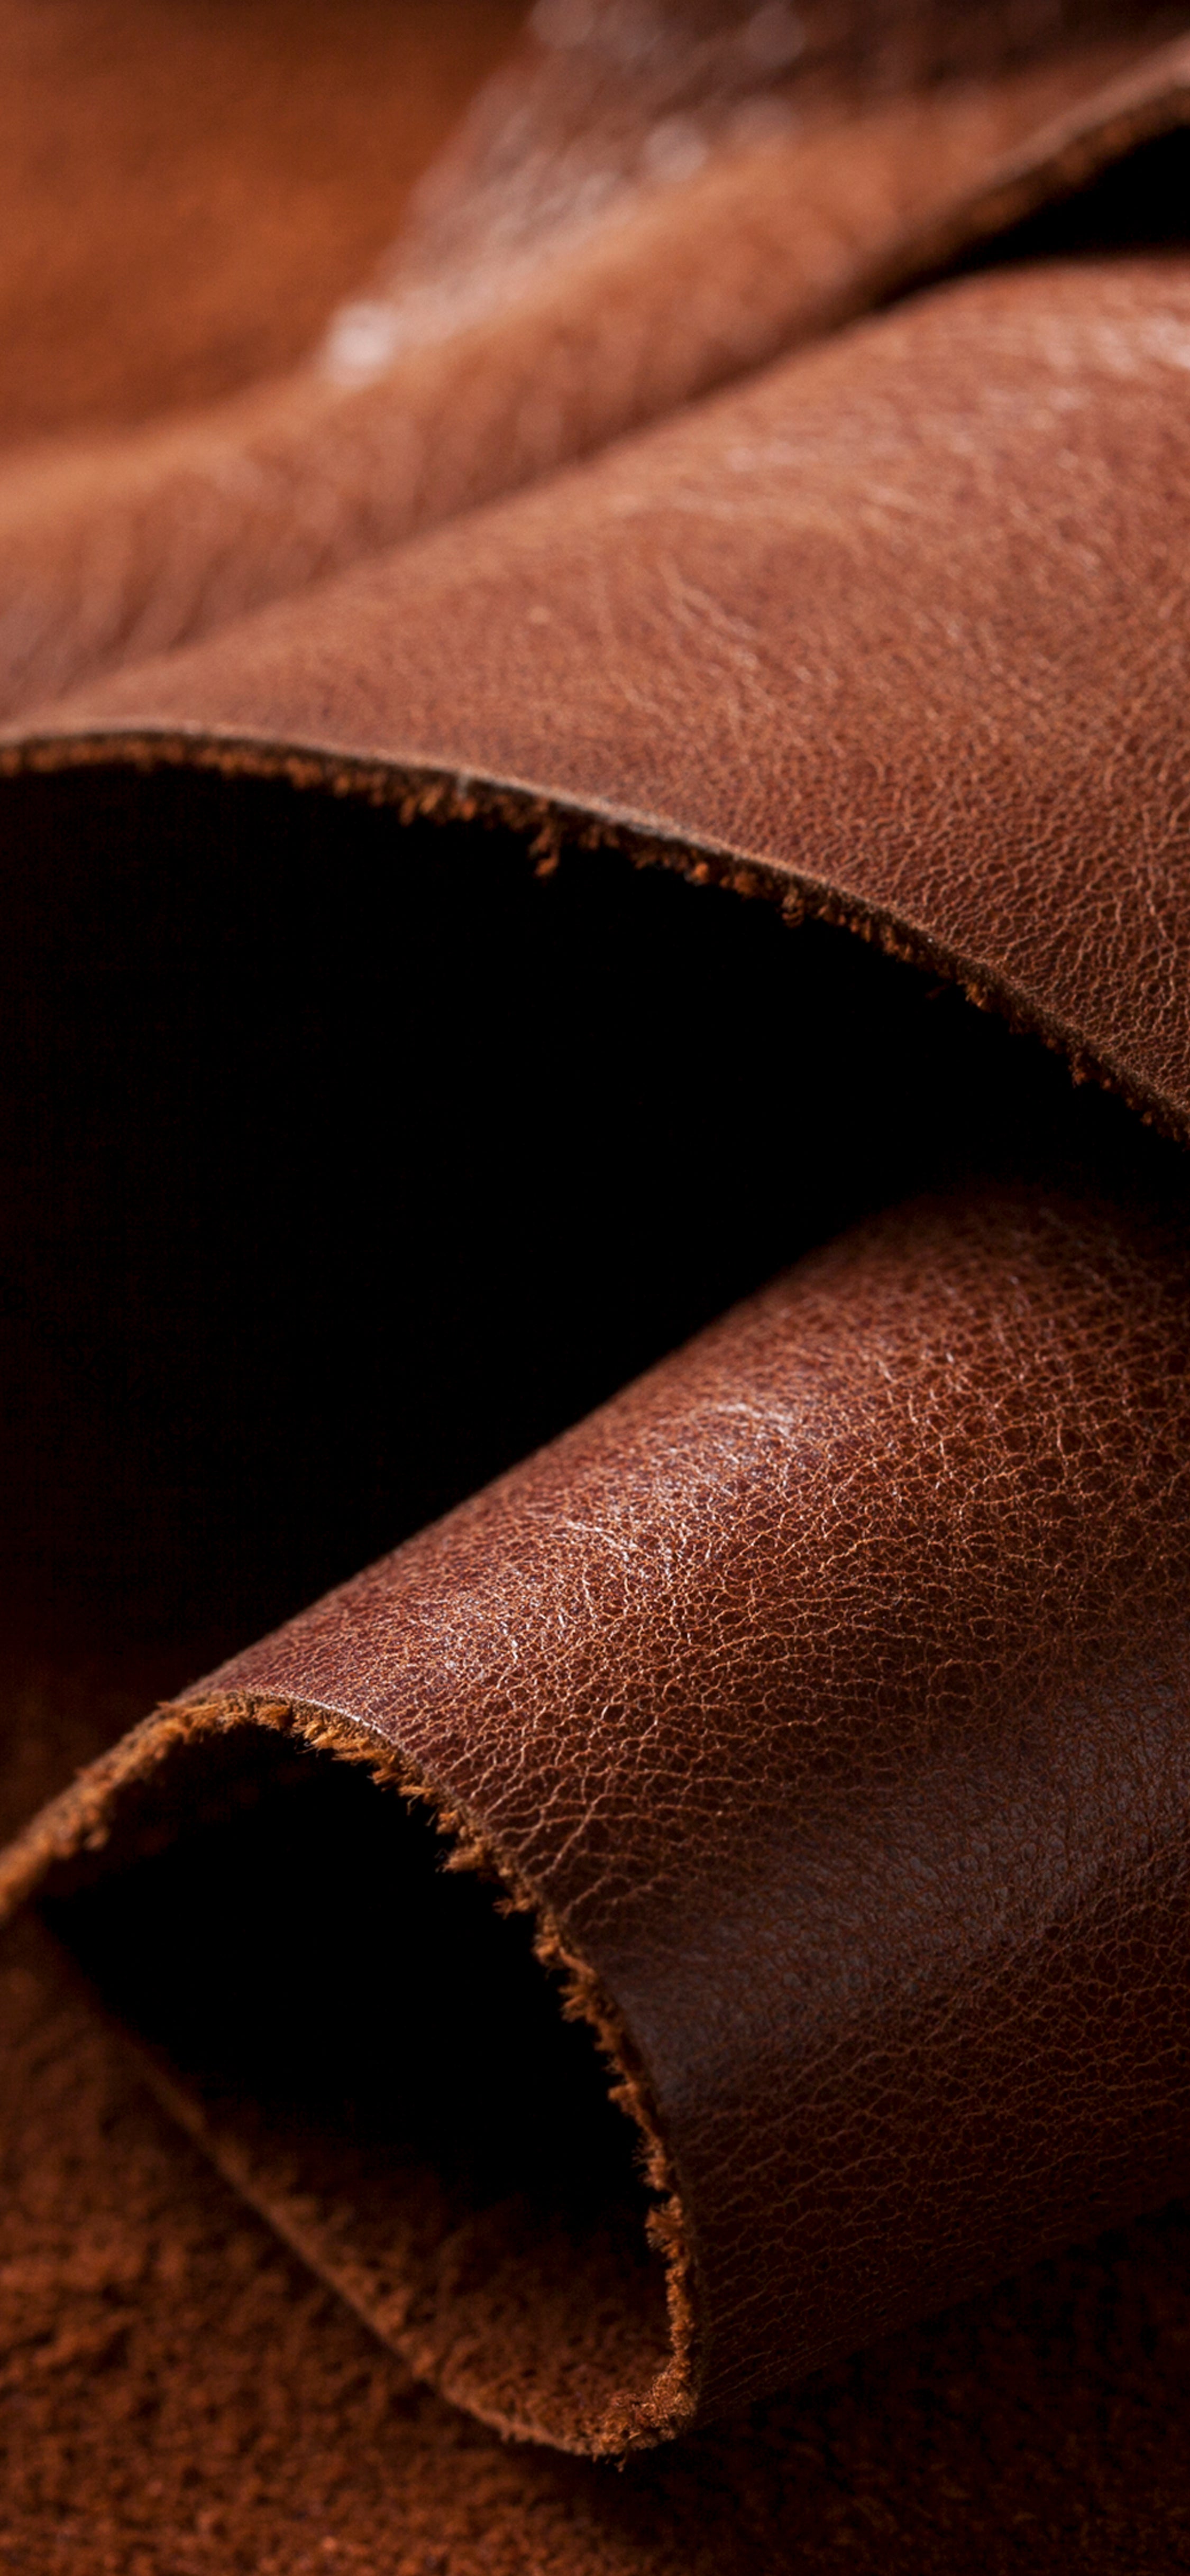 Apple iPhone Leather 720x1440 Brown  Apple wallpaper iphone Android  wallpaper vintage Apple iphone wallpaper hd